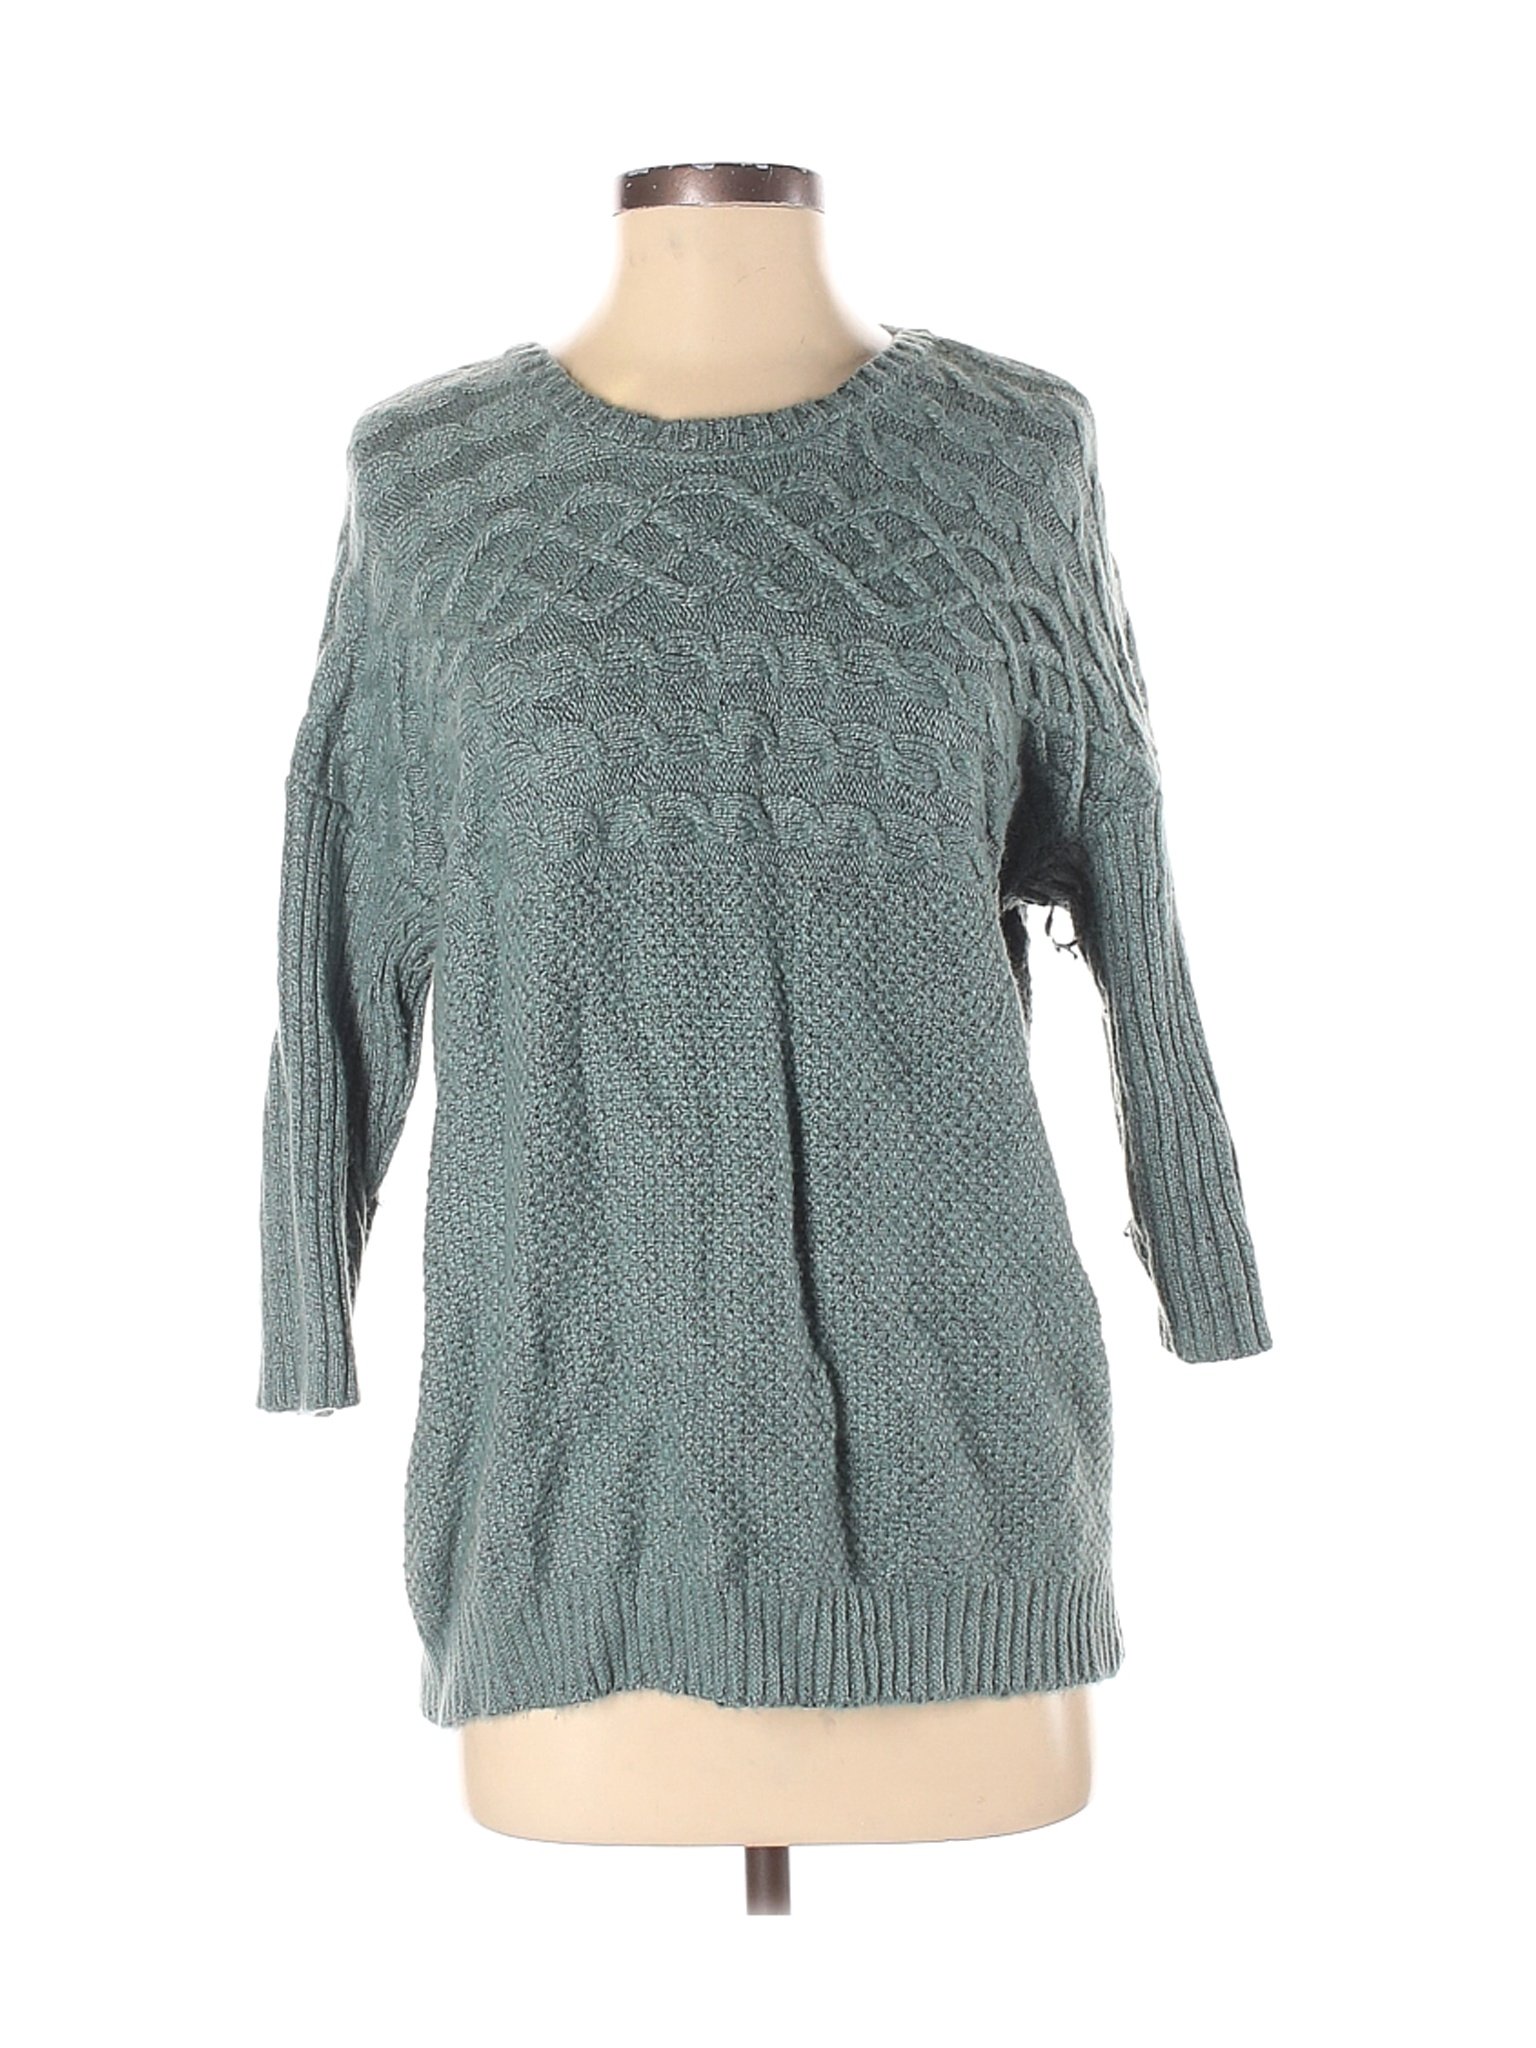 The Limited Women Green Pullover Sweater S | eBay